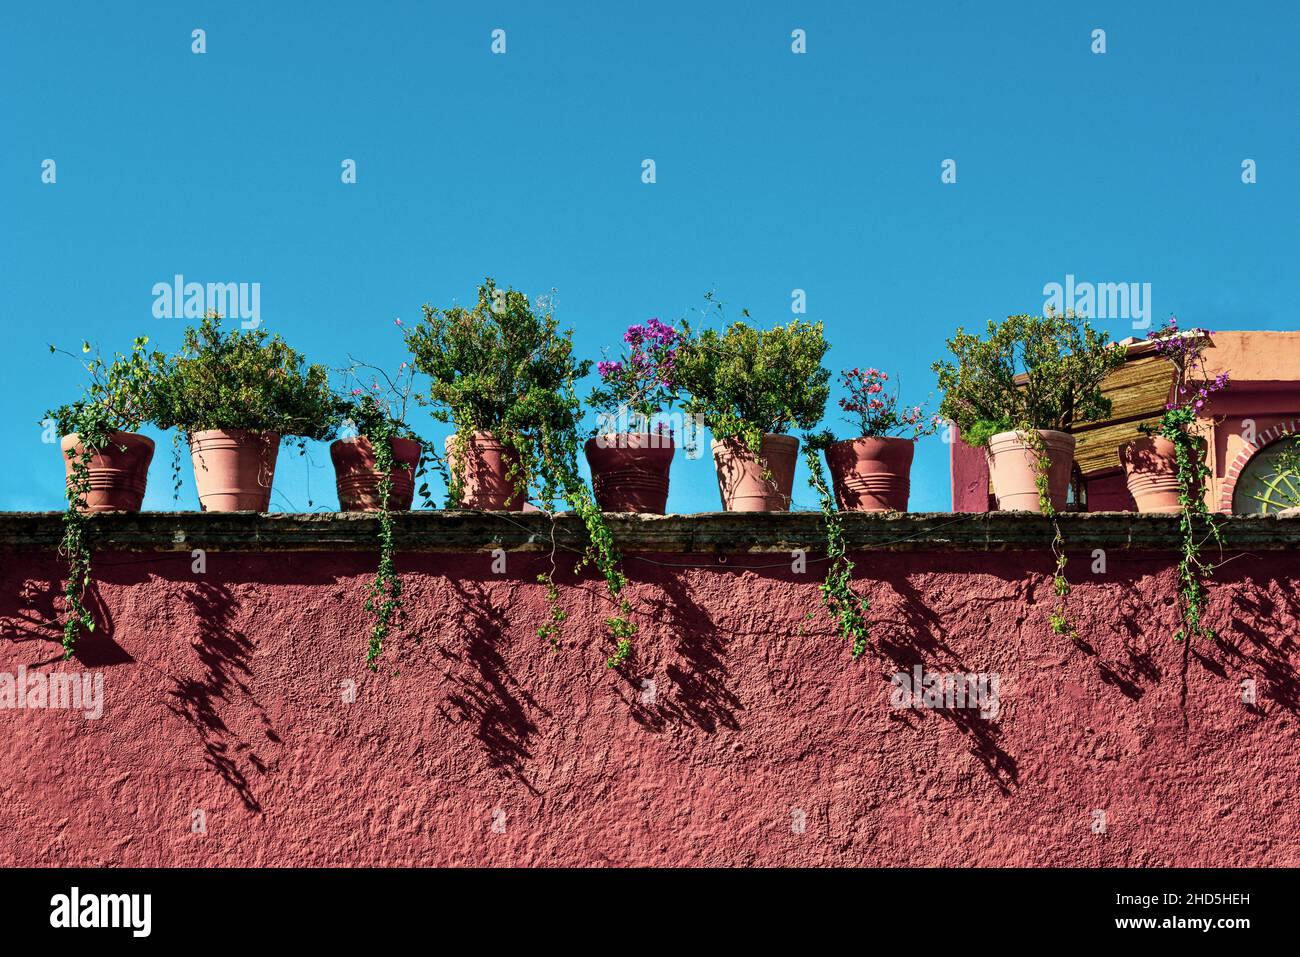 A close-up panoramic format of a rooftop garden with terra cotta pots along the flat roofline with blooming plants  in San Miguel de Allende, Mexico Stock Photo